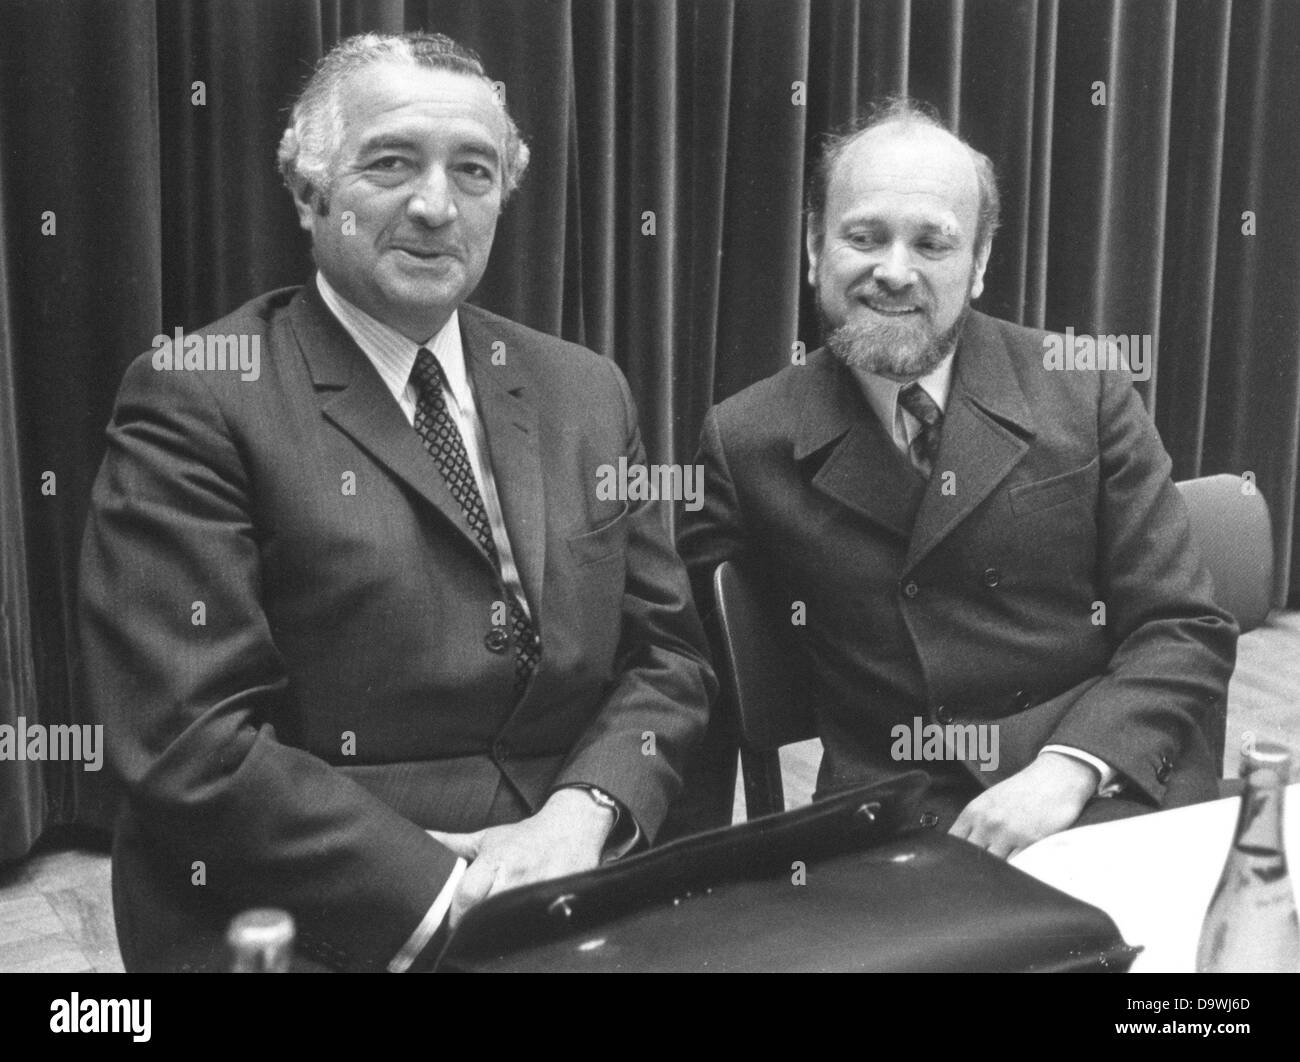 FDP chairman and federal minister Erich Mende together with the American founder of the 'Investstars Overseas Service' Bernard Cornfeld in the Palmengarten in Frankfurt am Main in April 1970. Stock Photo